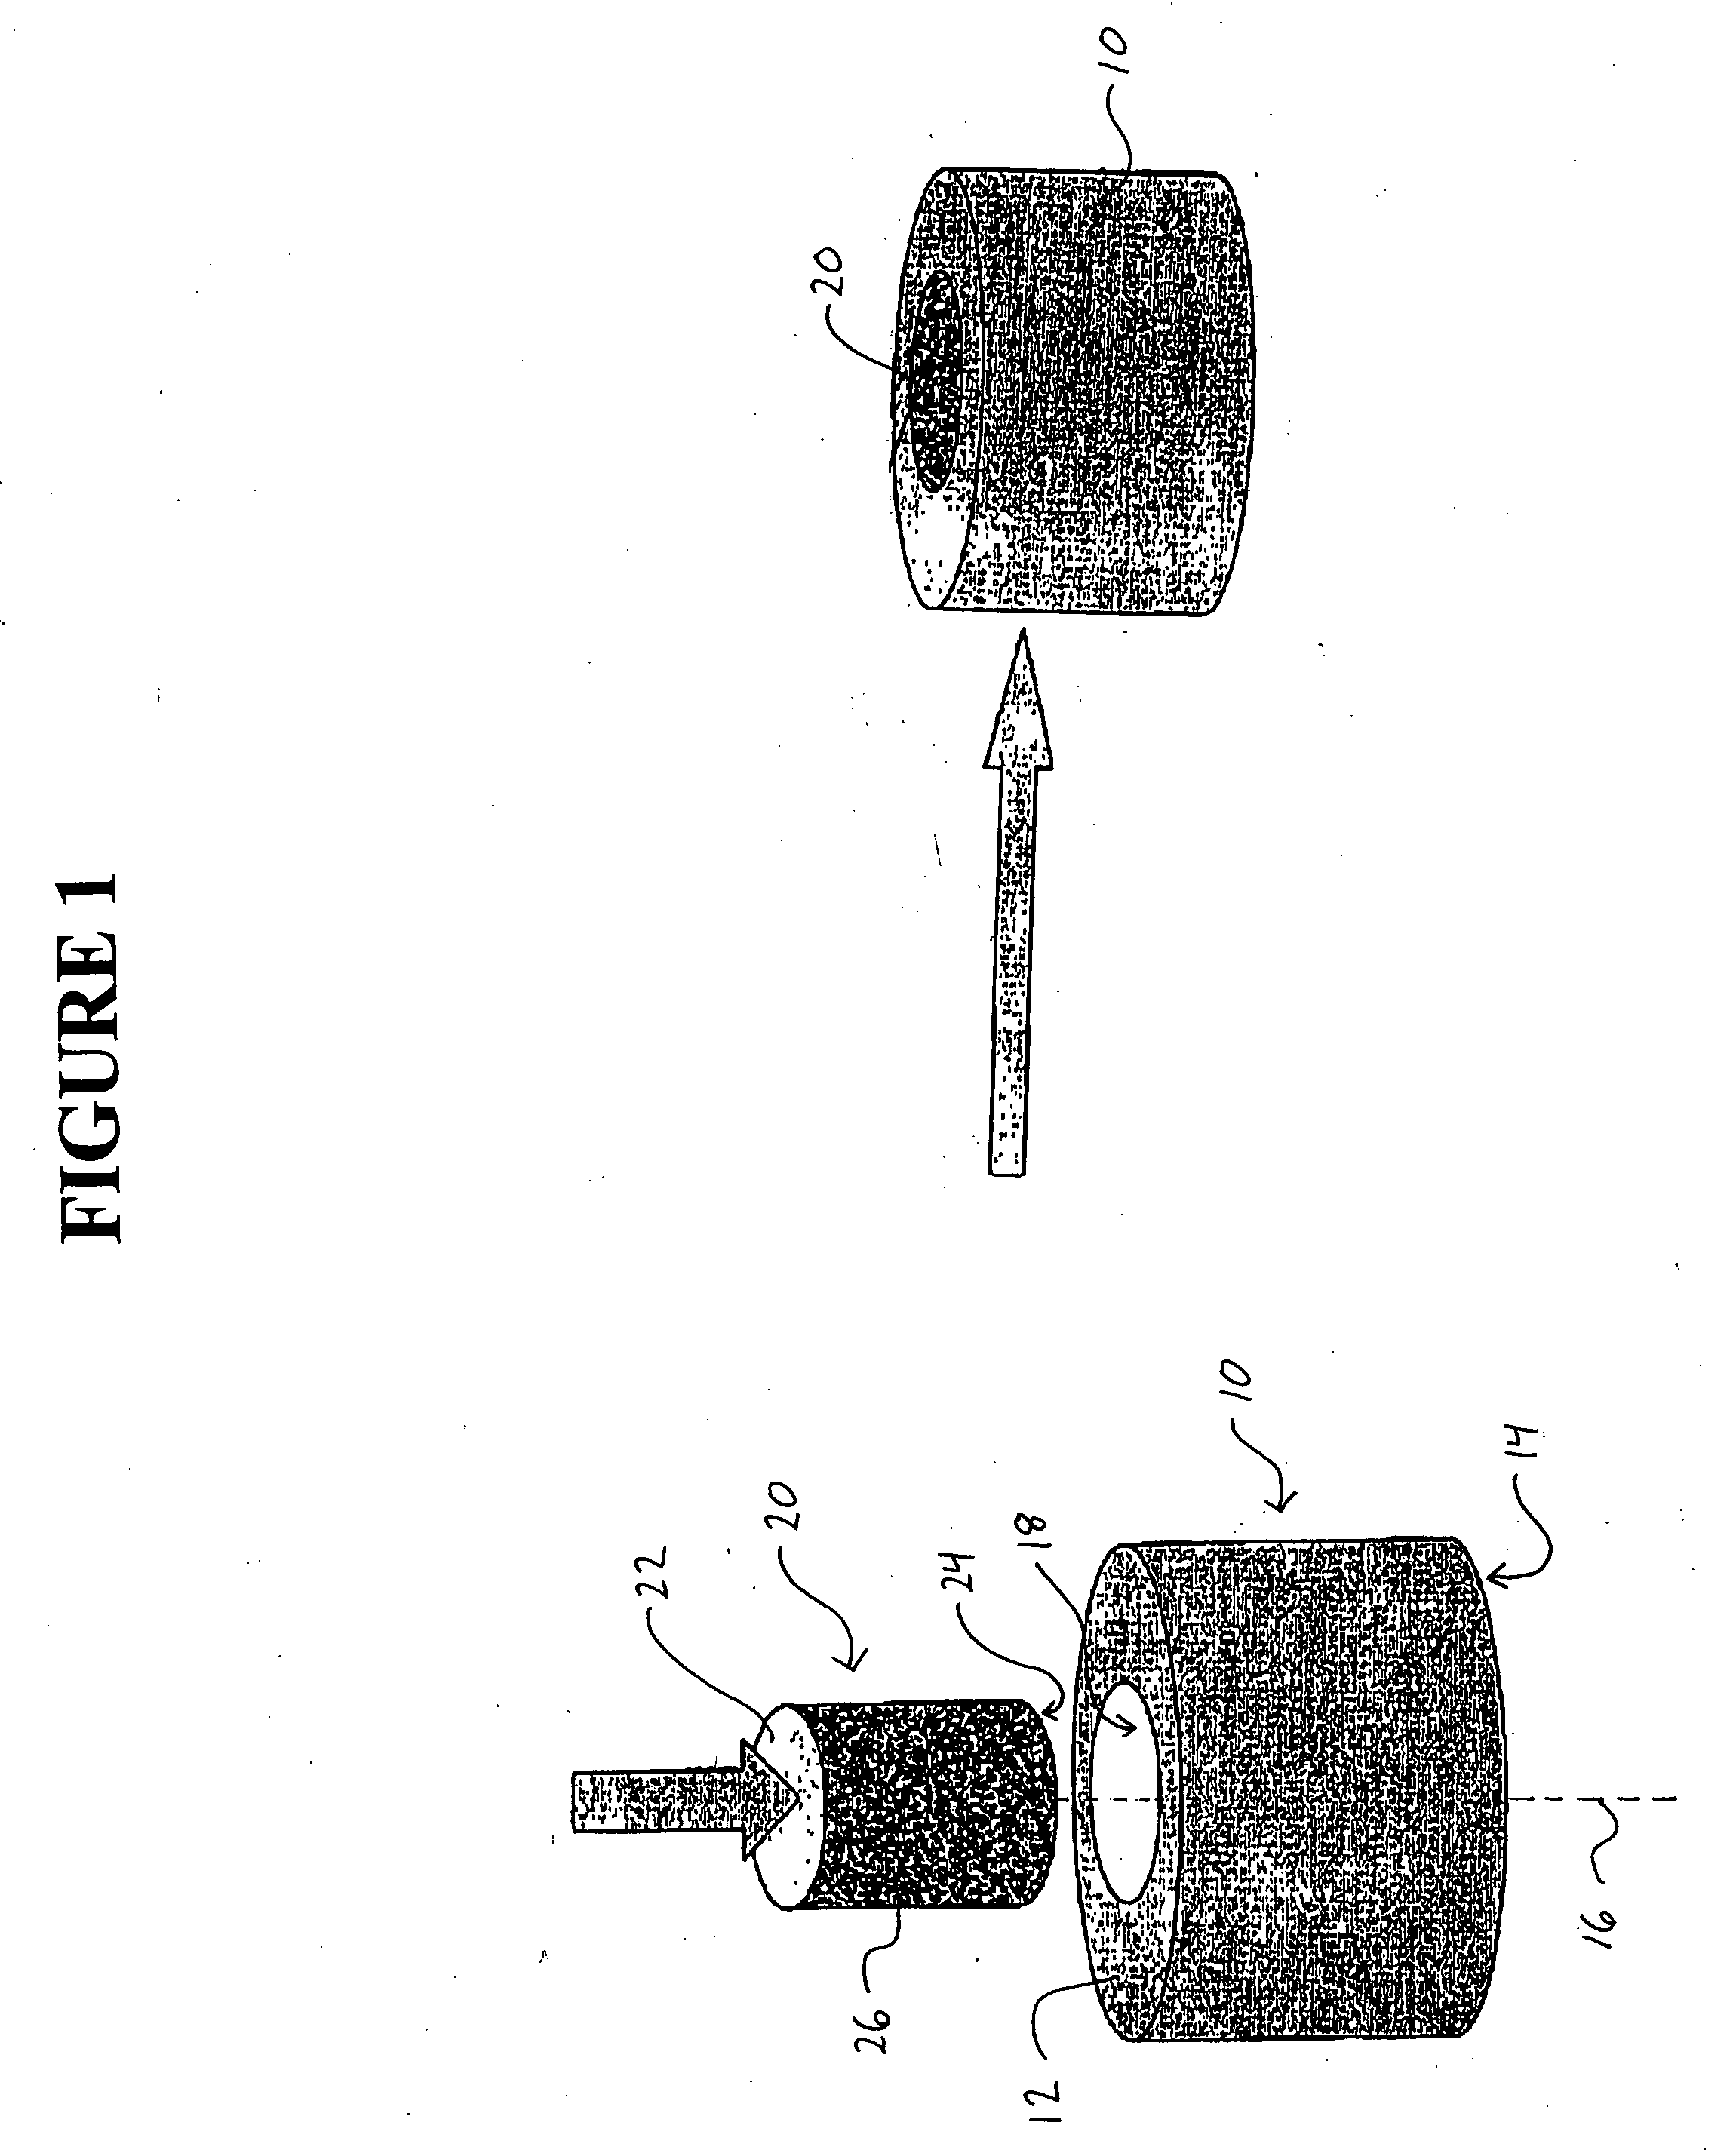 Osteoconductive integrated spinal cage and method of making same